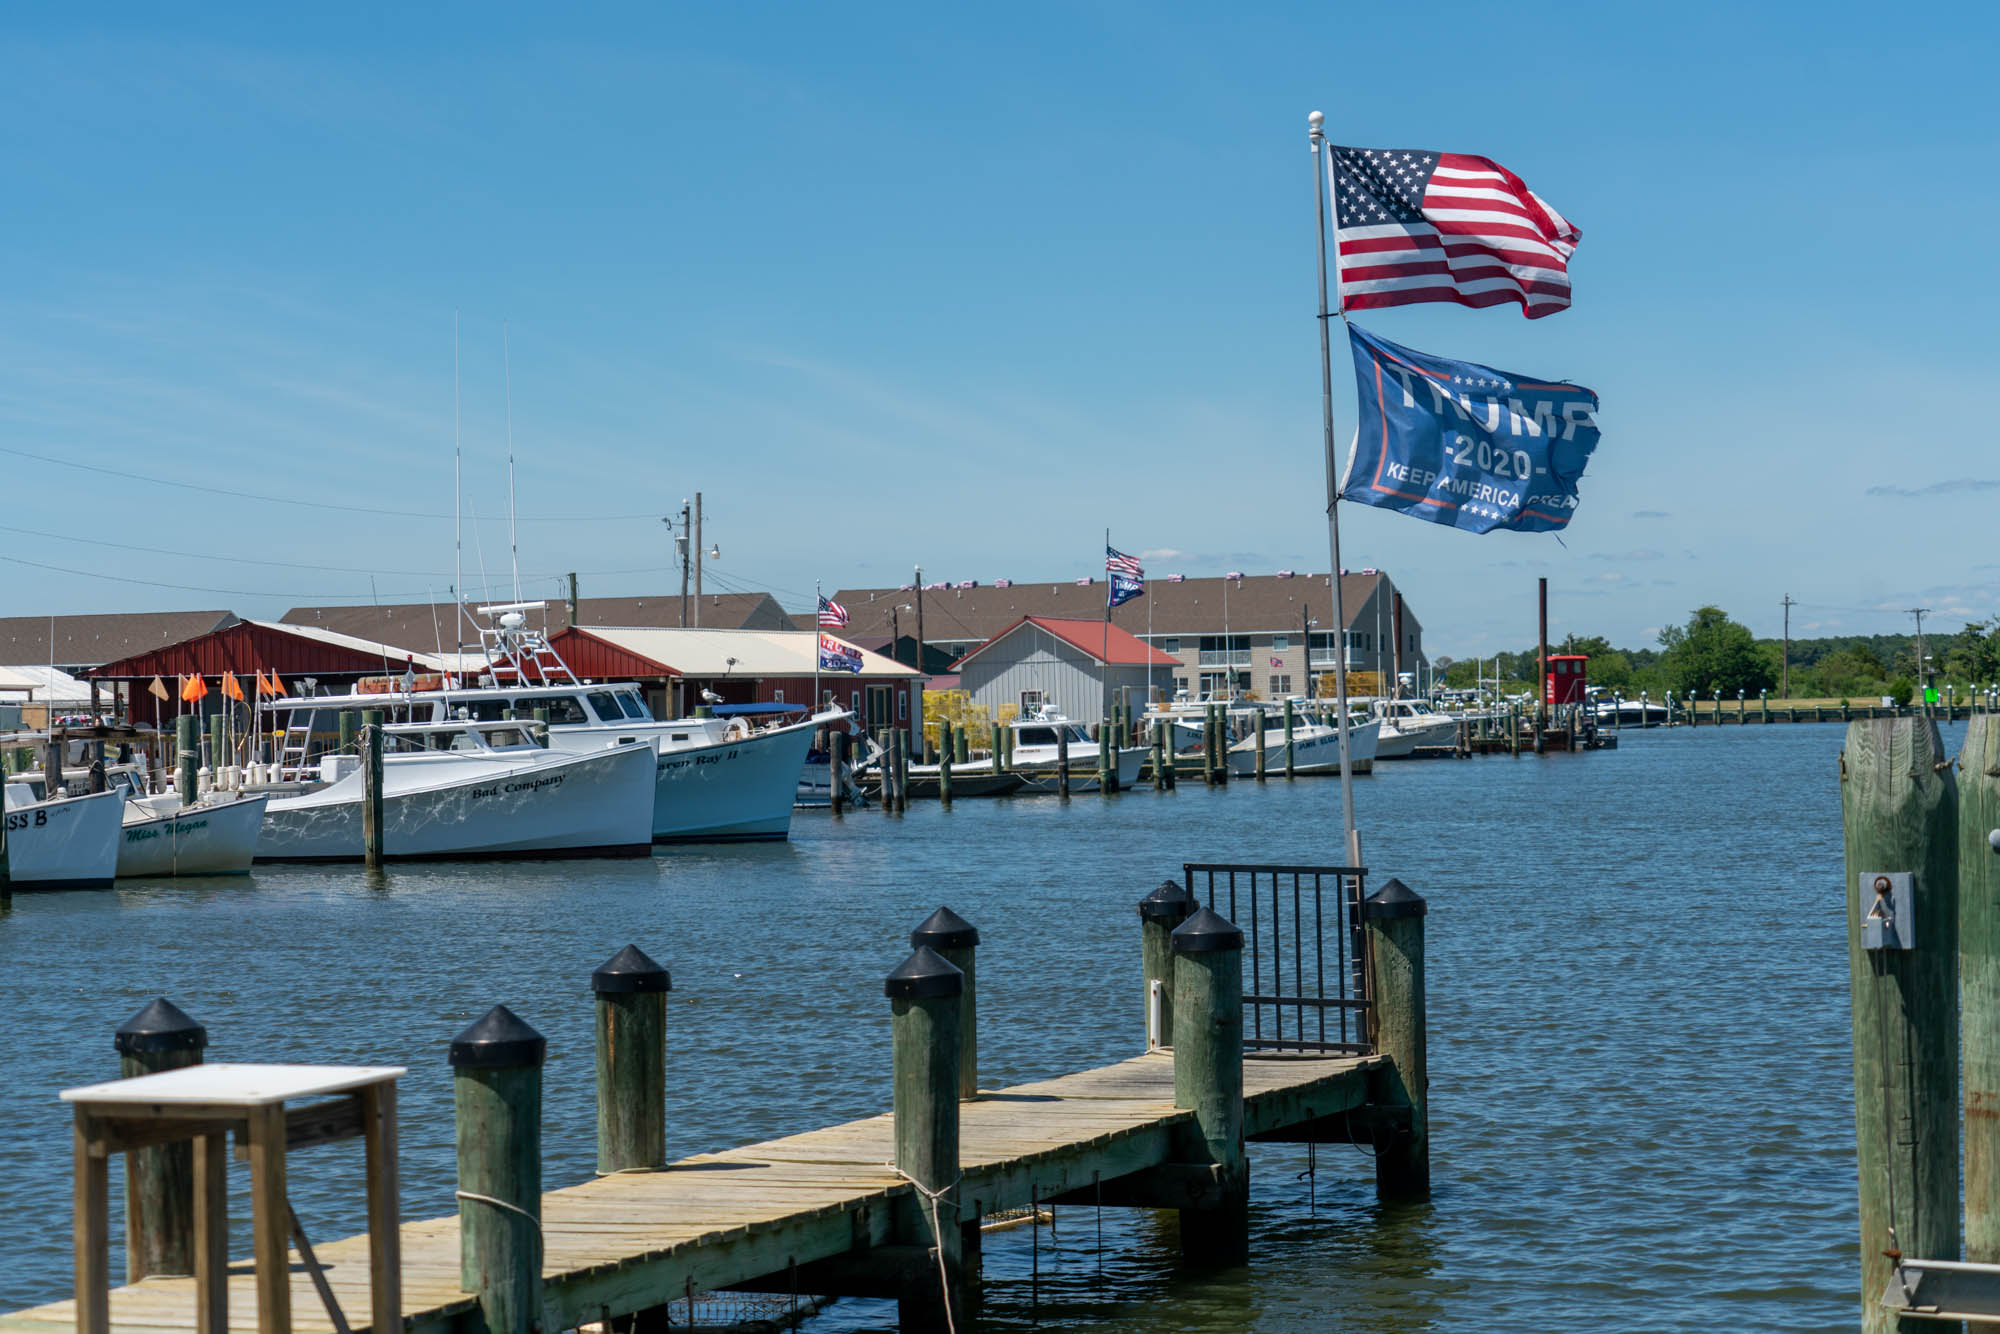 Although scientists say the Eastern Shore of Maryland is highly vulnerable to the effects of rising seas, only about 40% of people living along the Chesapeake Bay believe global warming will harm them personally. (Jordan Laird/News21)